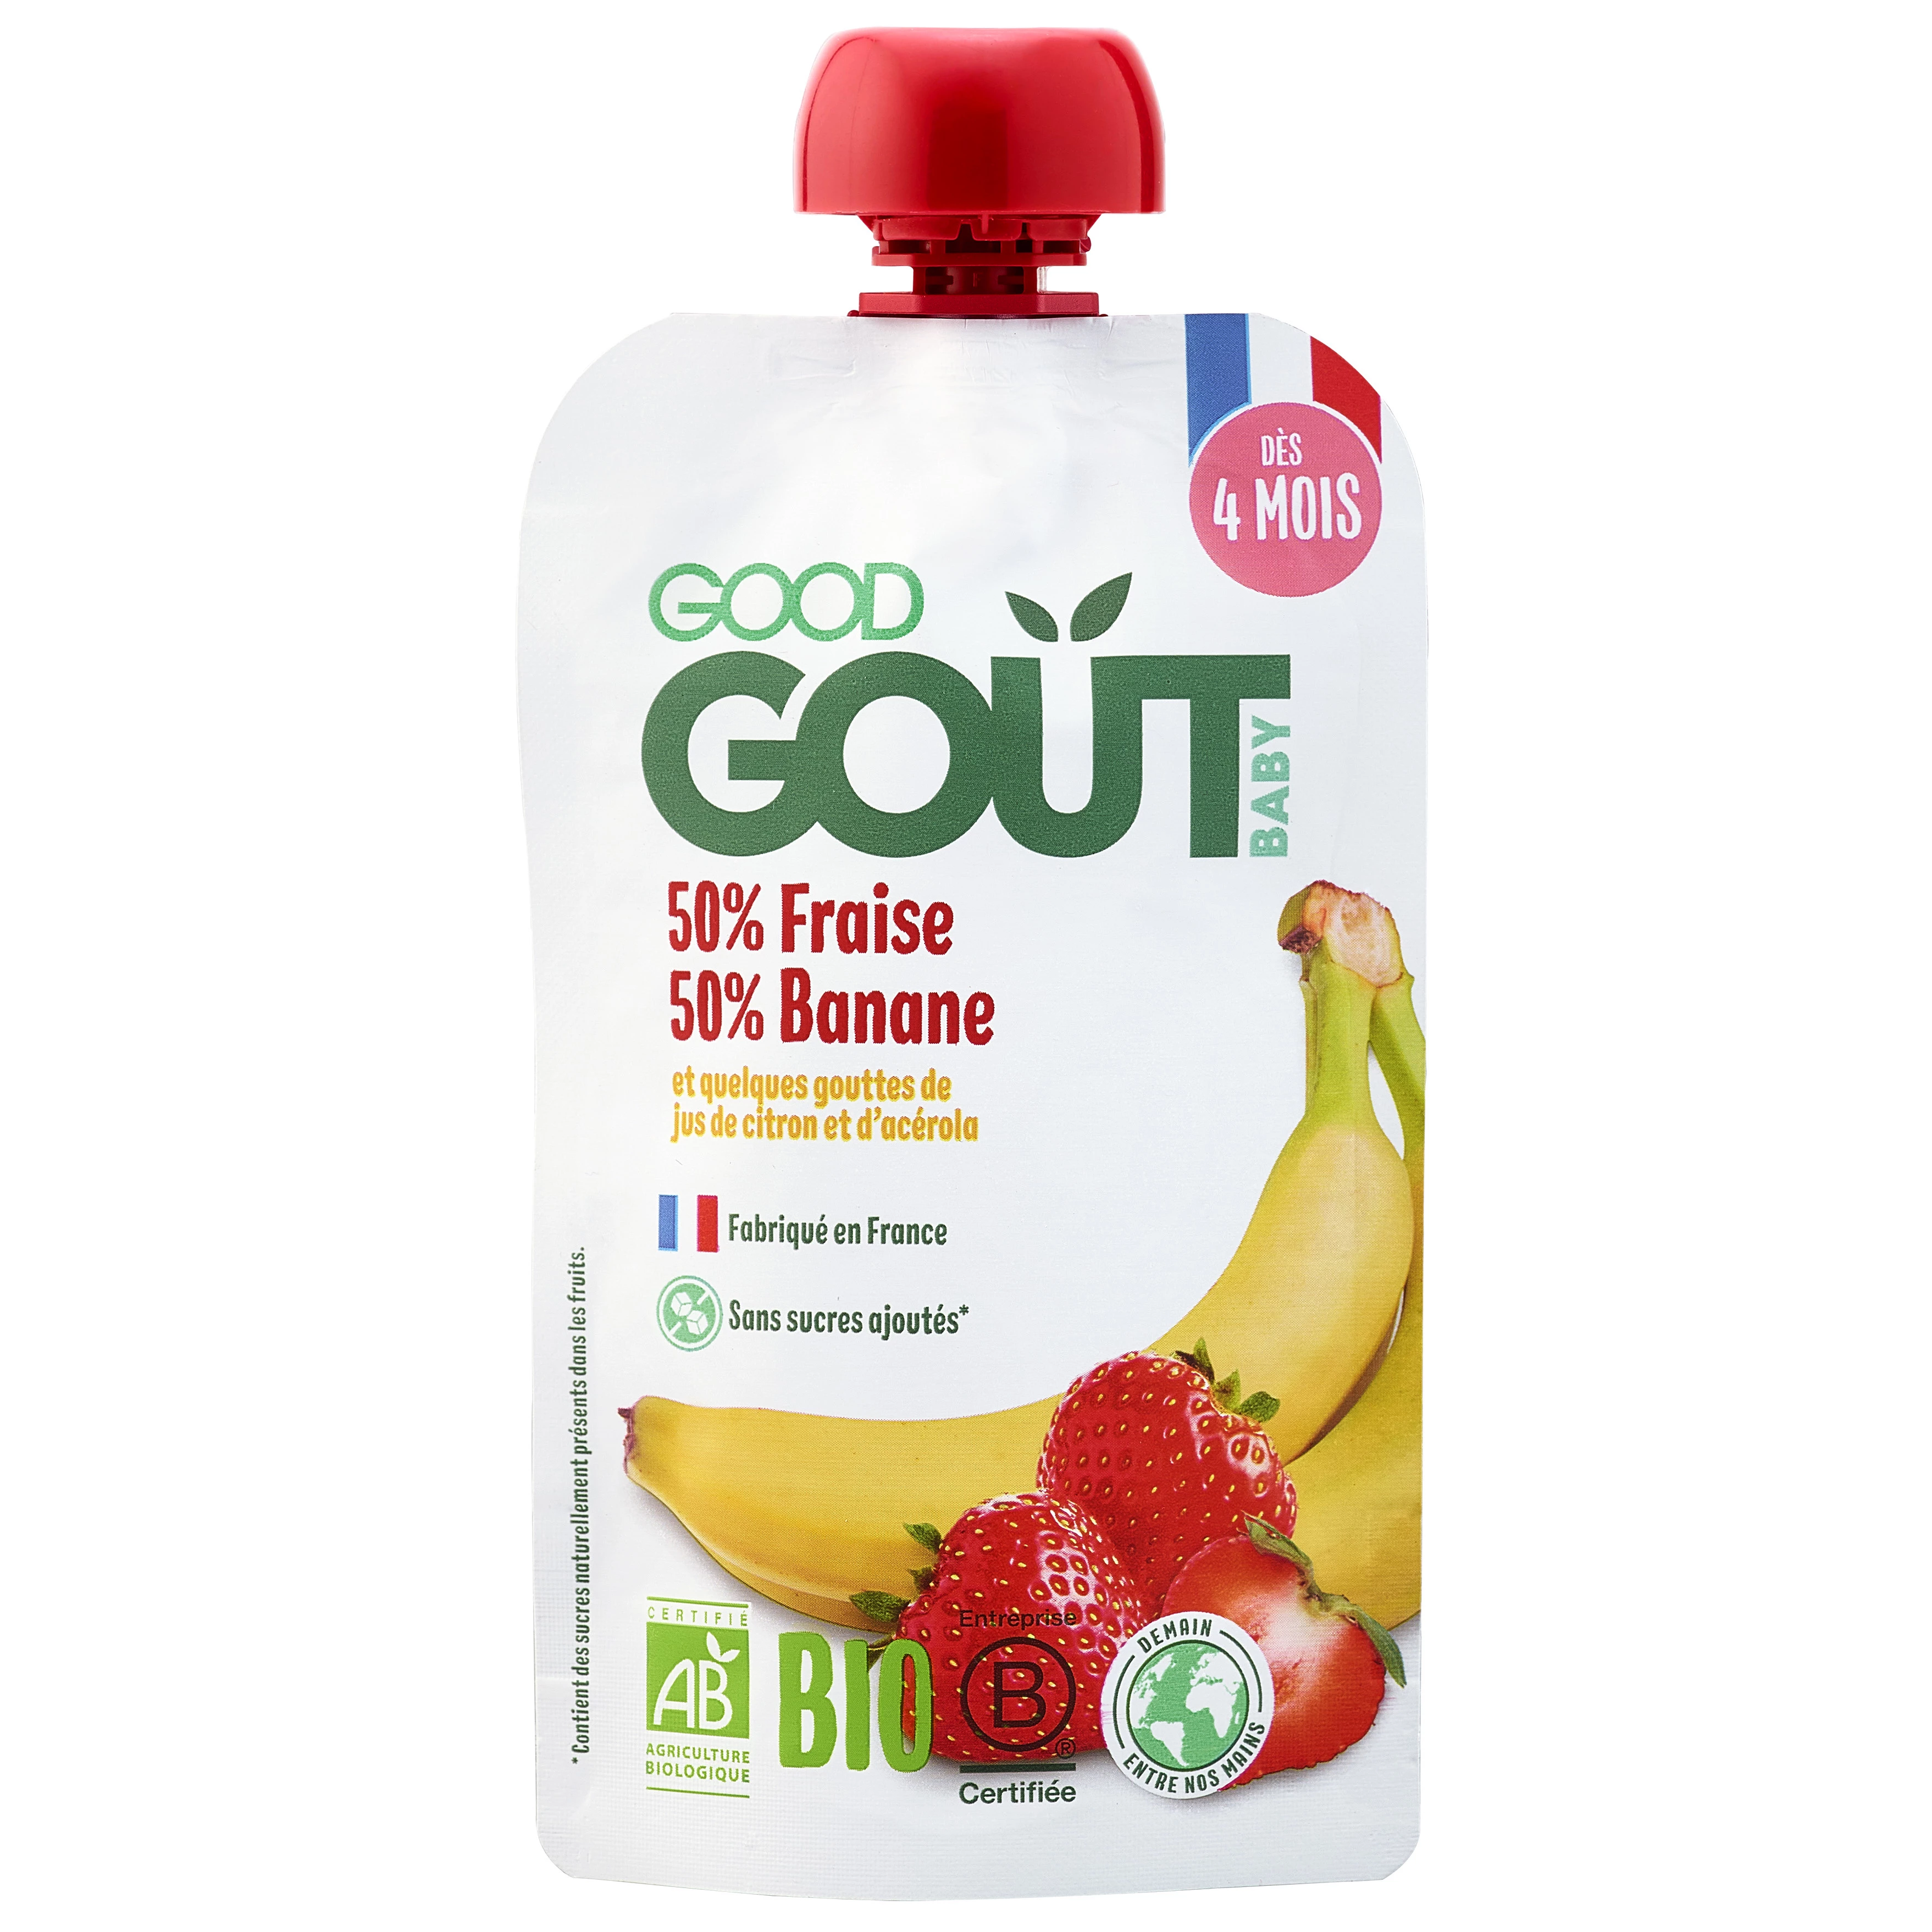 Strawberry Banana Water Bottle from 4 months, 120g - GOOD GOUT